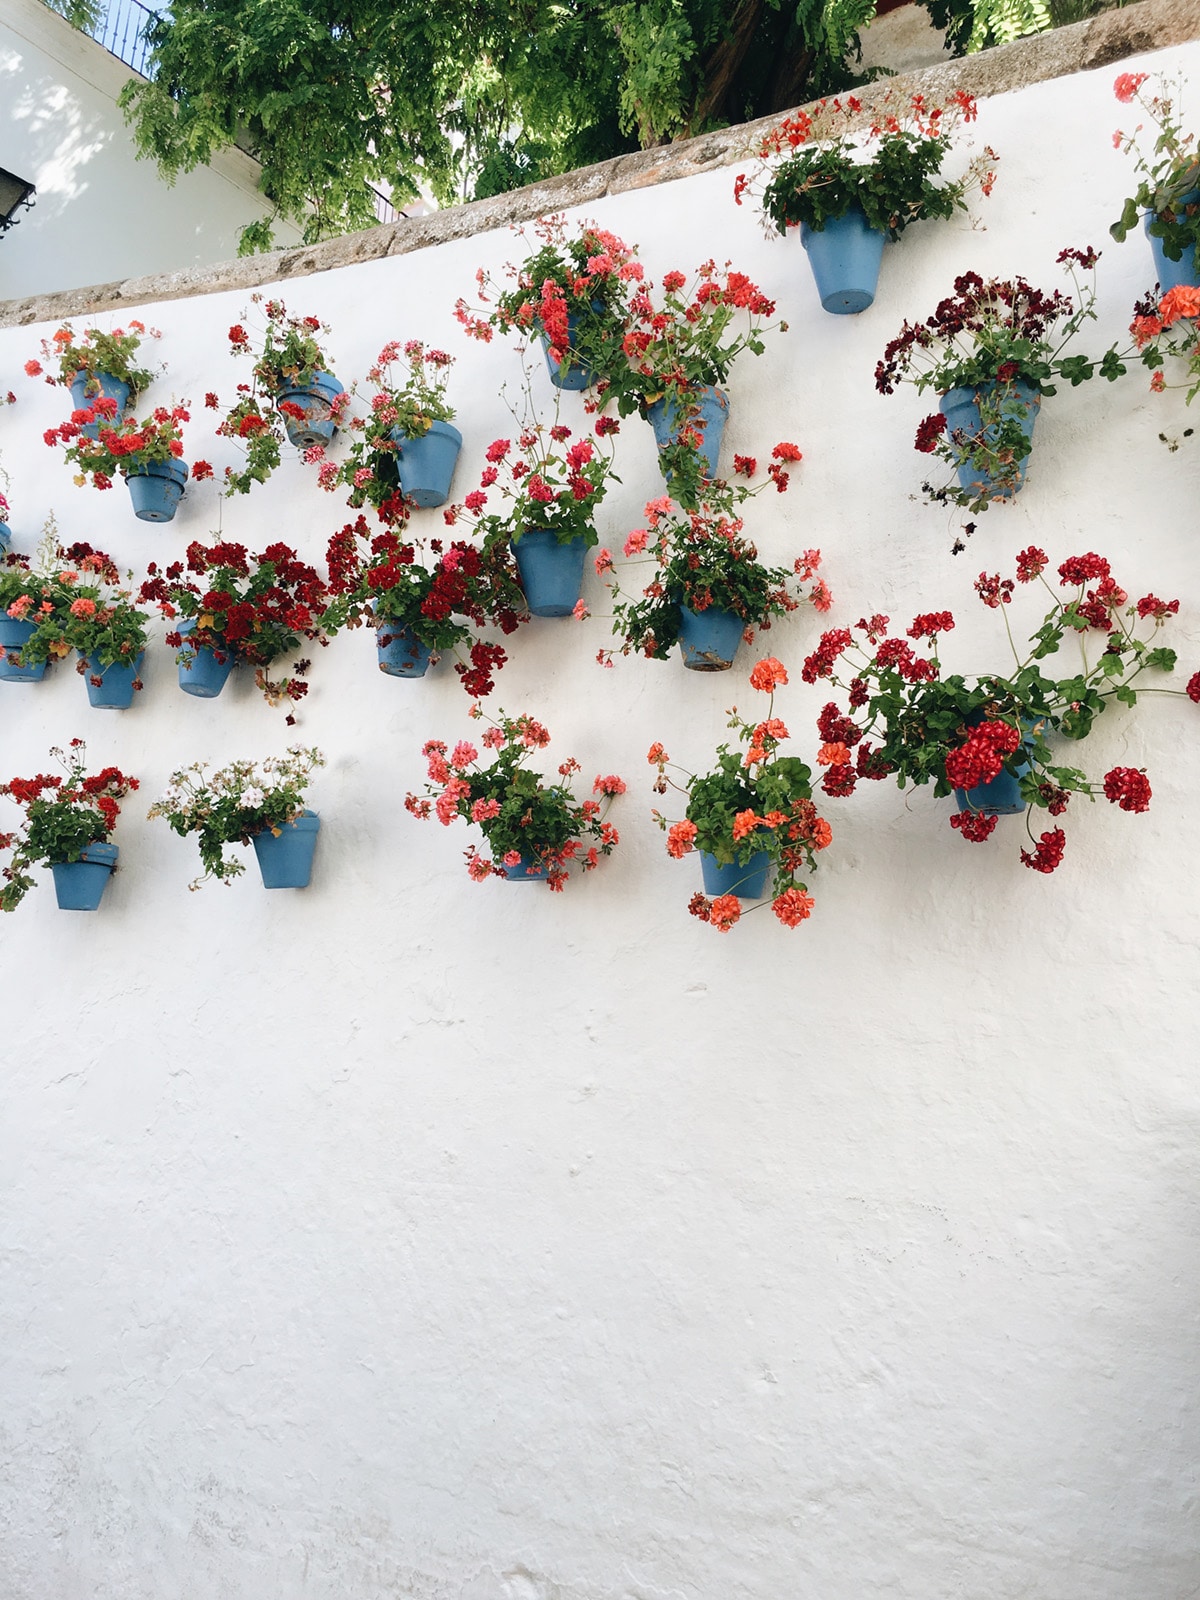 potted plants line the walkways of old town marbella | see our guide to the costa del sol on coco kelley